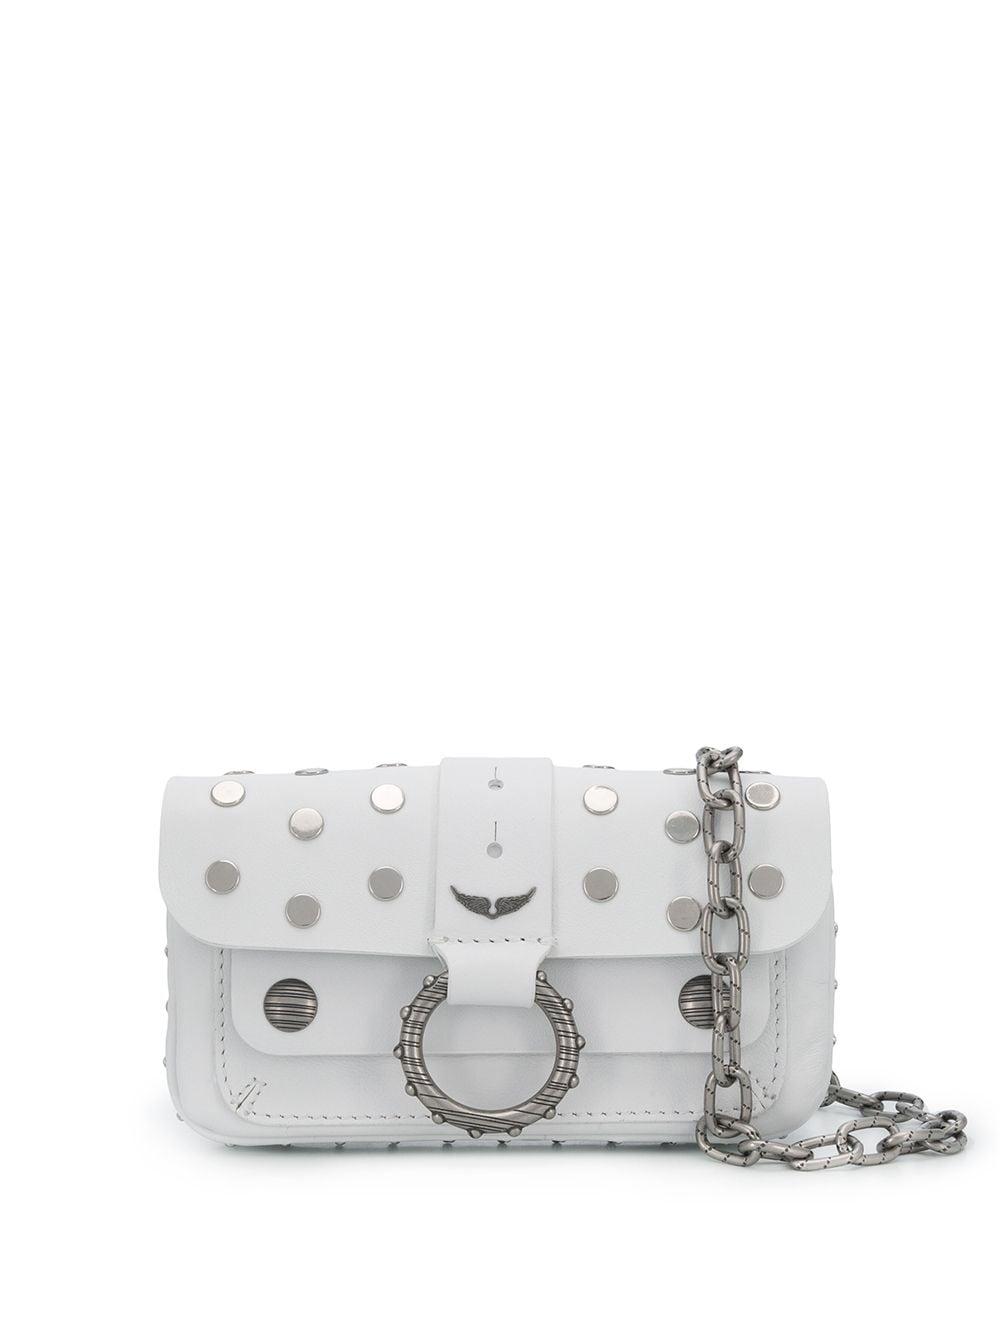 Zadig & Voltaire Leather Fashion Show Kate Studs Wallet Bag in White - Lyst